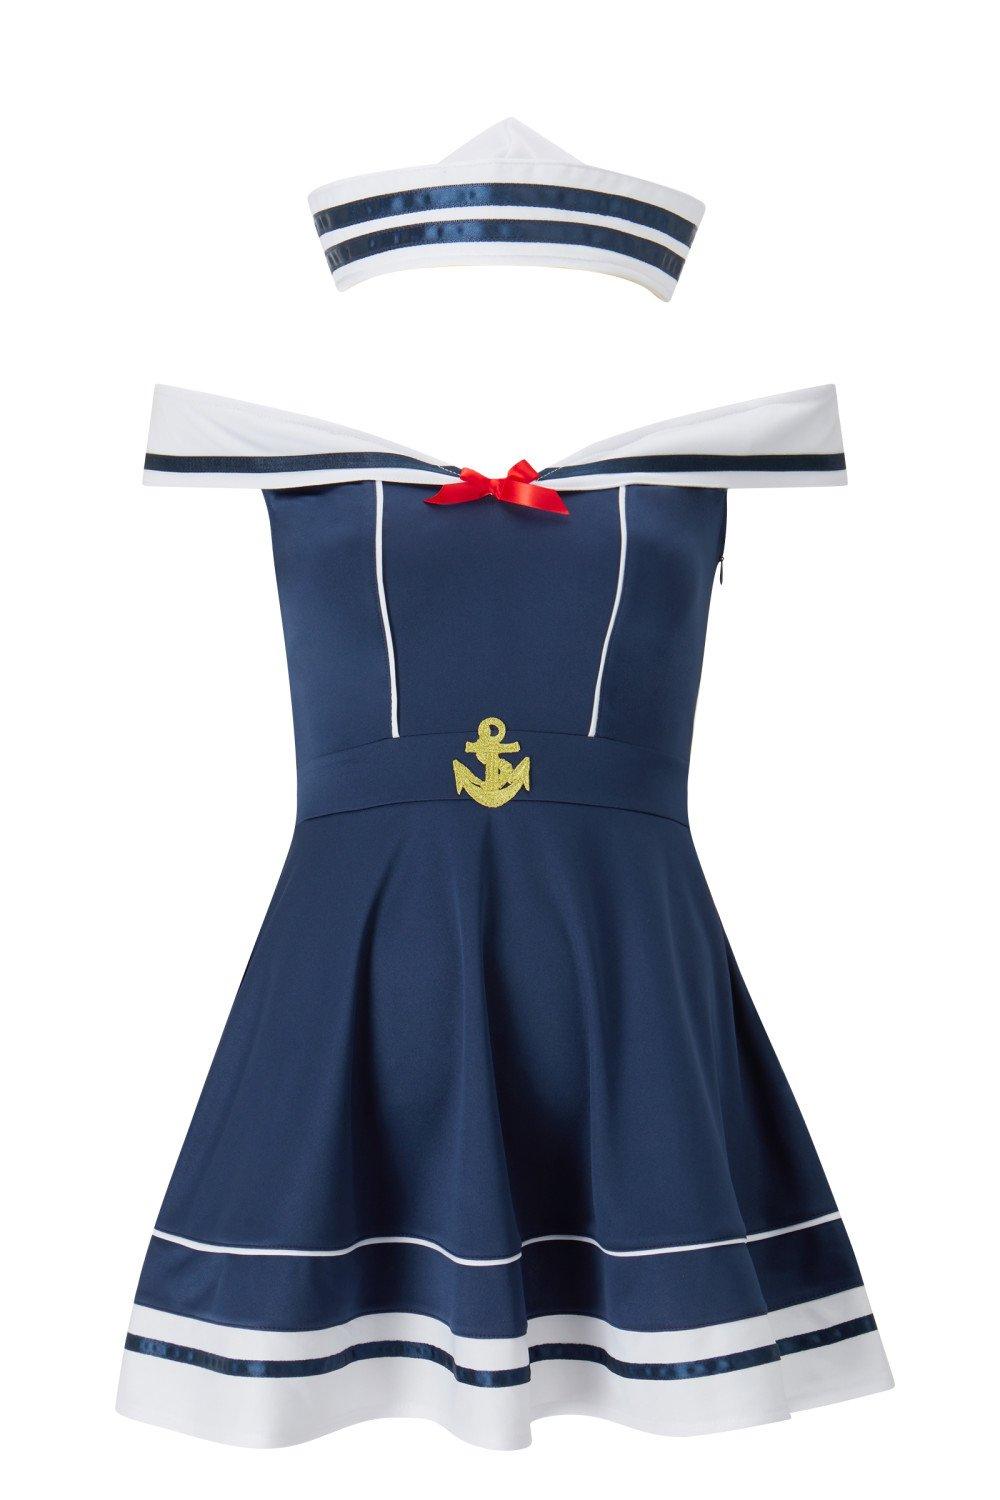 Sexy Sailor Outfit